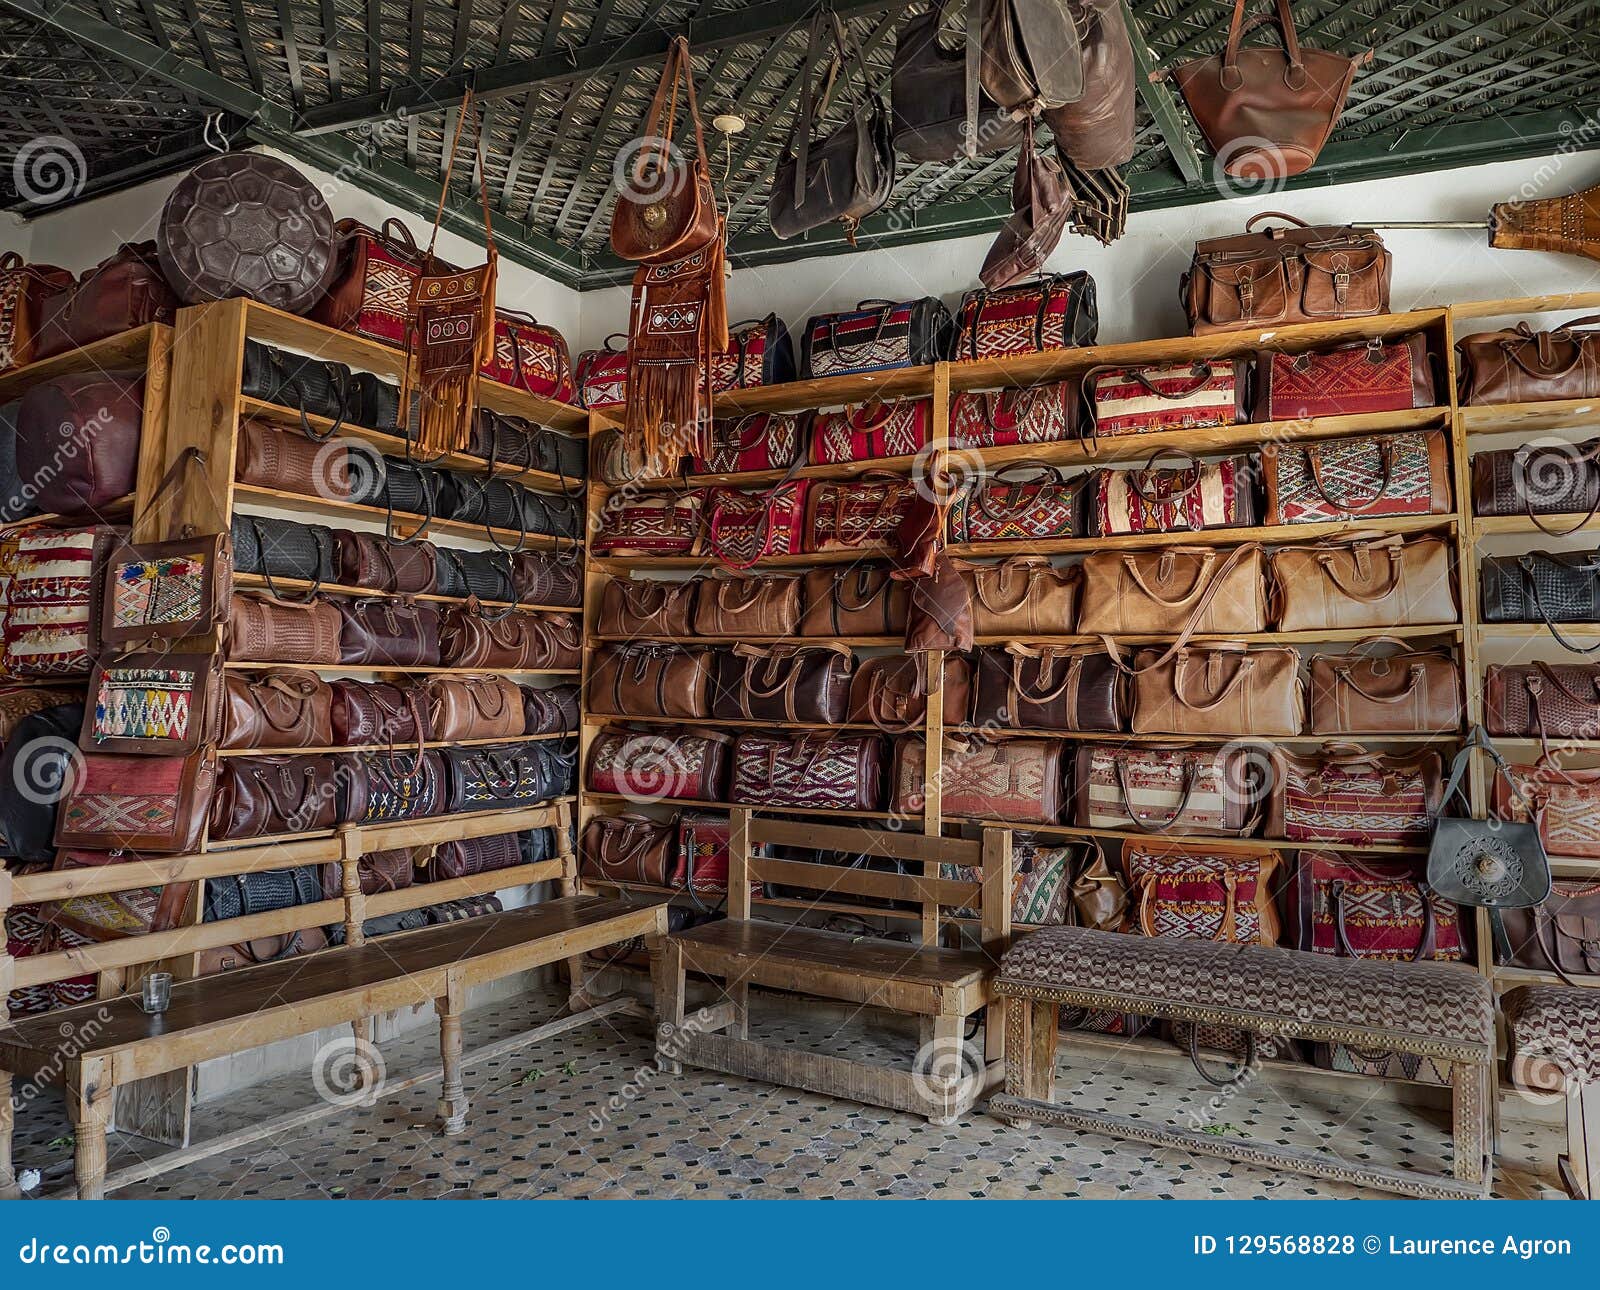 leather goods in fes, morocco